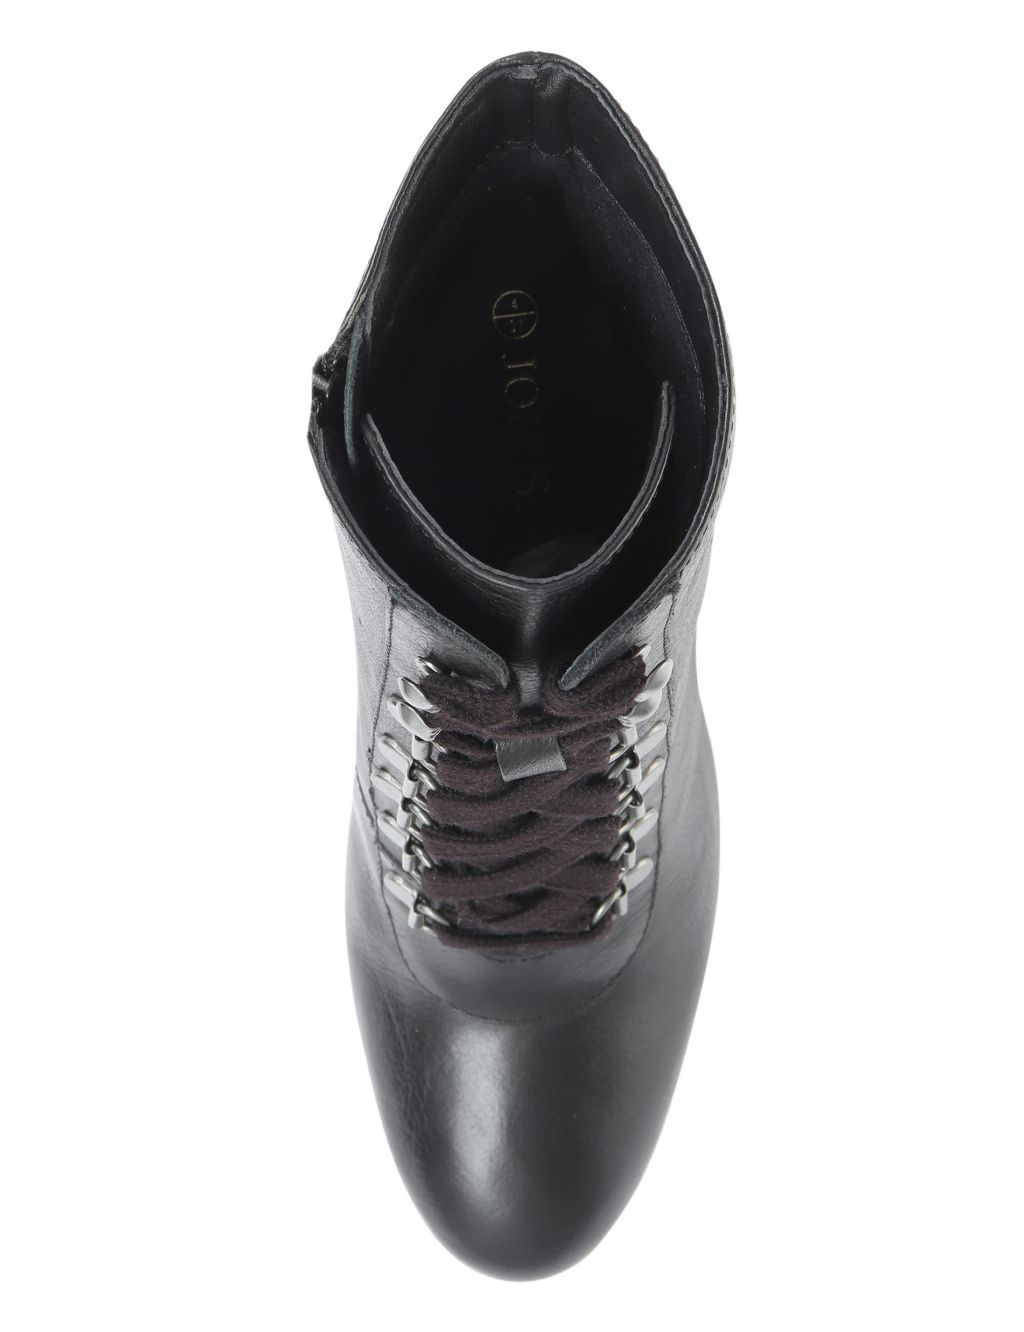 Leather Lace-Up Block Heel Ankle Boots image 3